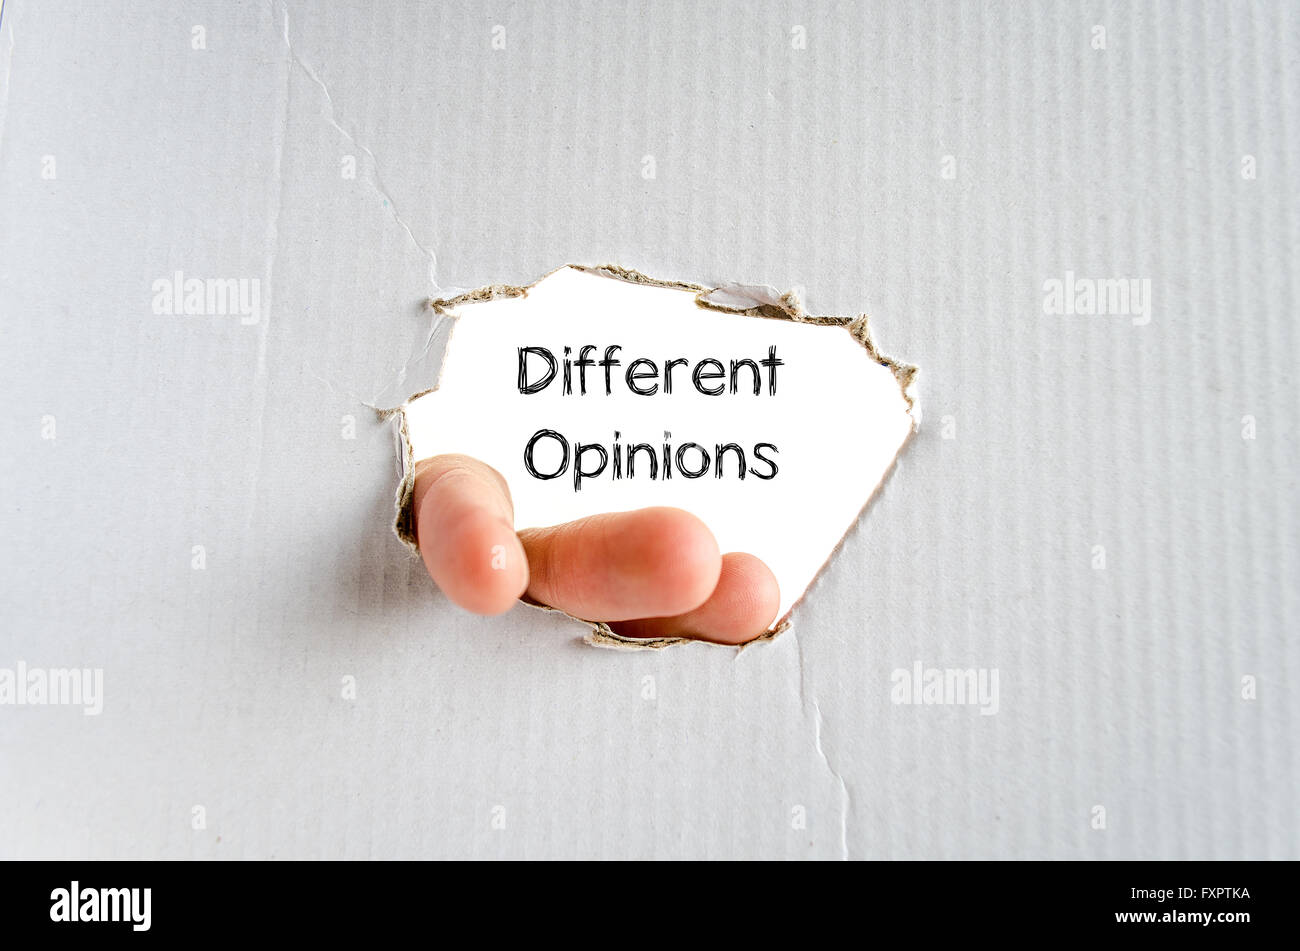 Different opinions note in business man hand Stock Photo